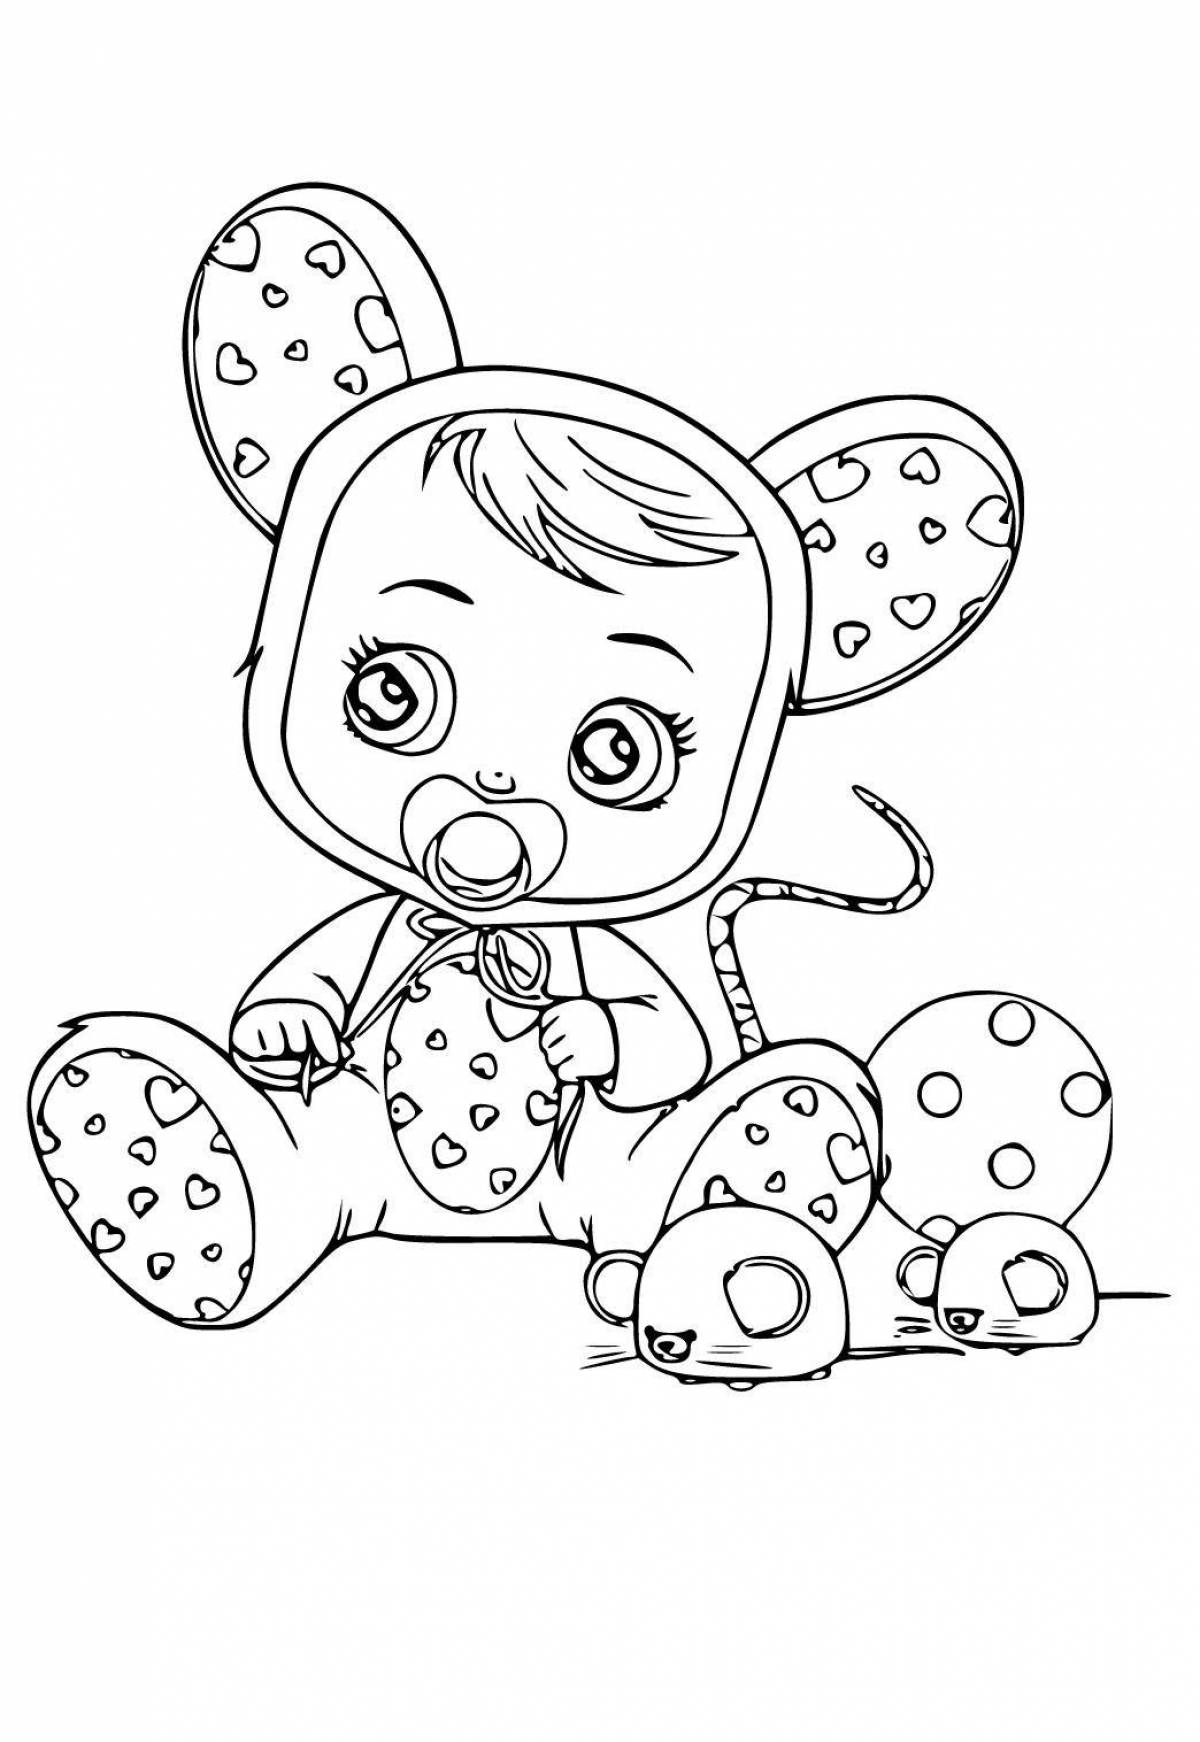 Flawless Crying Babies coloring page